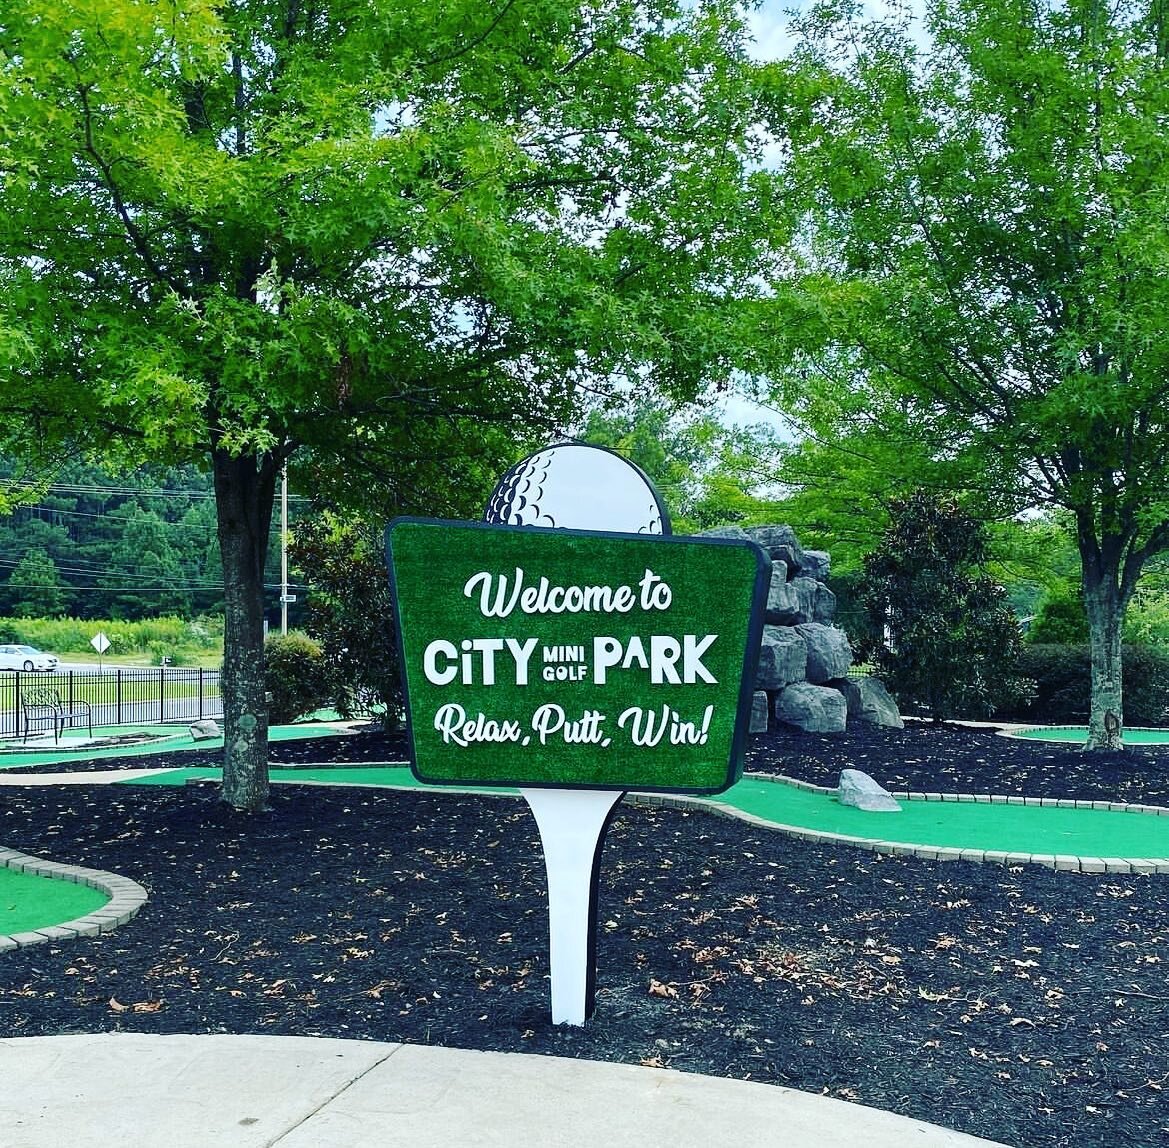 Perfect Day to get outdoors! &lsquo;Relax Putt Win&rsquo; at City Park Mini Golf. ⛳️ Open noon - 9 pm Saturday and 1 - 6 pm tomorrow. 😄